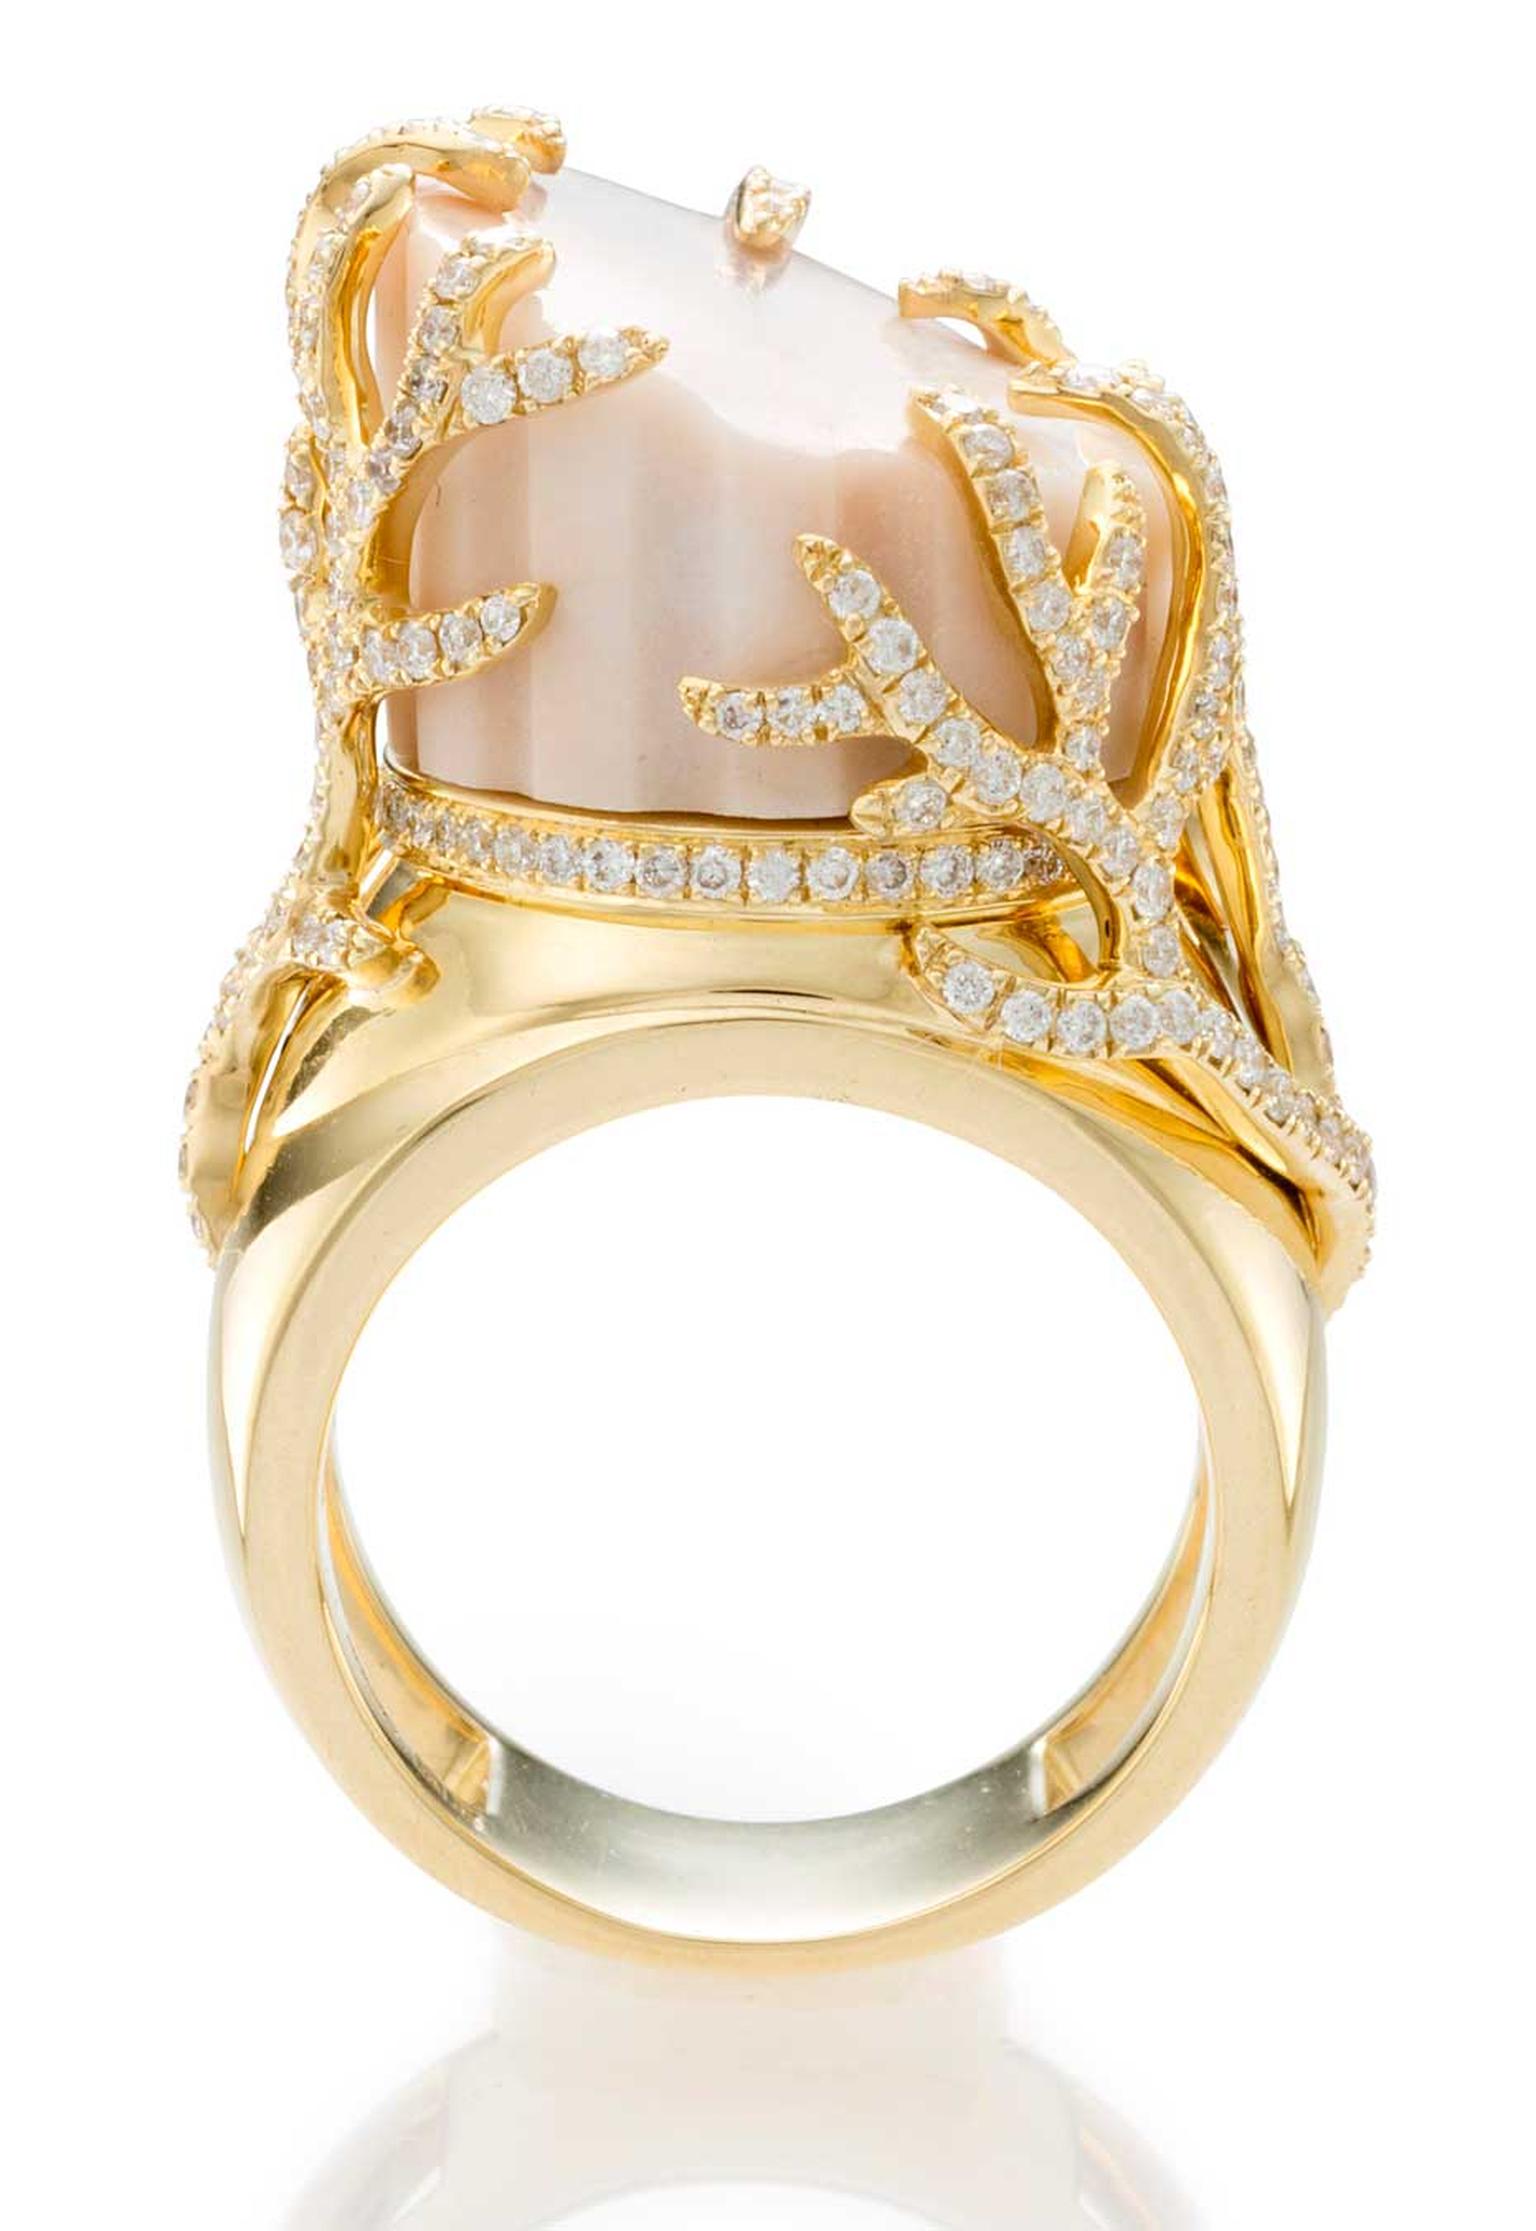 The marble in this CompletedWorks ring is surrounded by a circular-cut diamond and gold vine motif, with Great Britain assay marks.